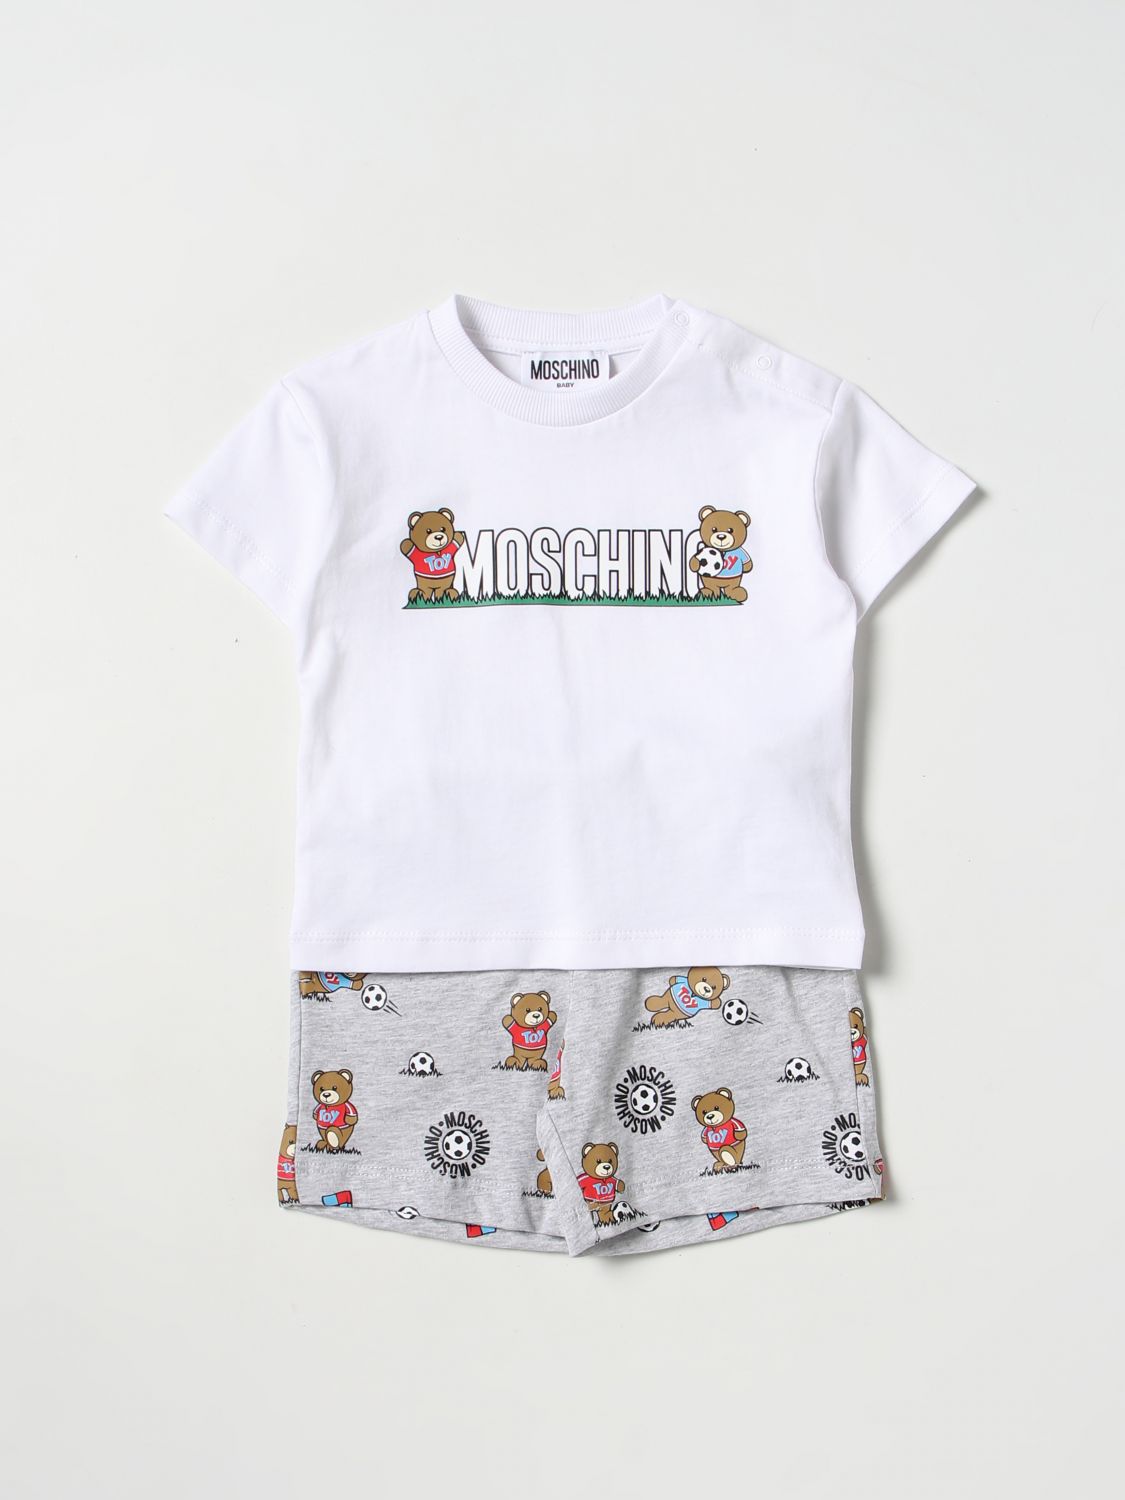 Moschino Baby Tracksuits  Kids Color Grey